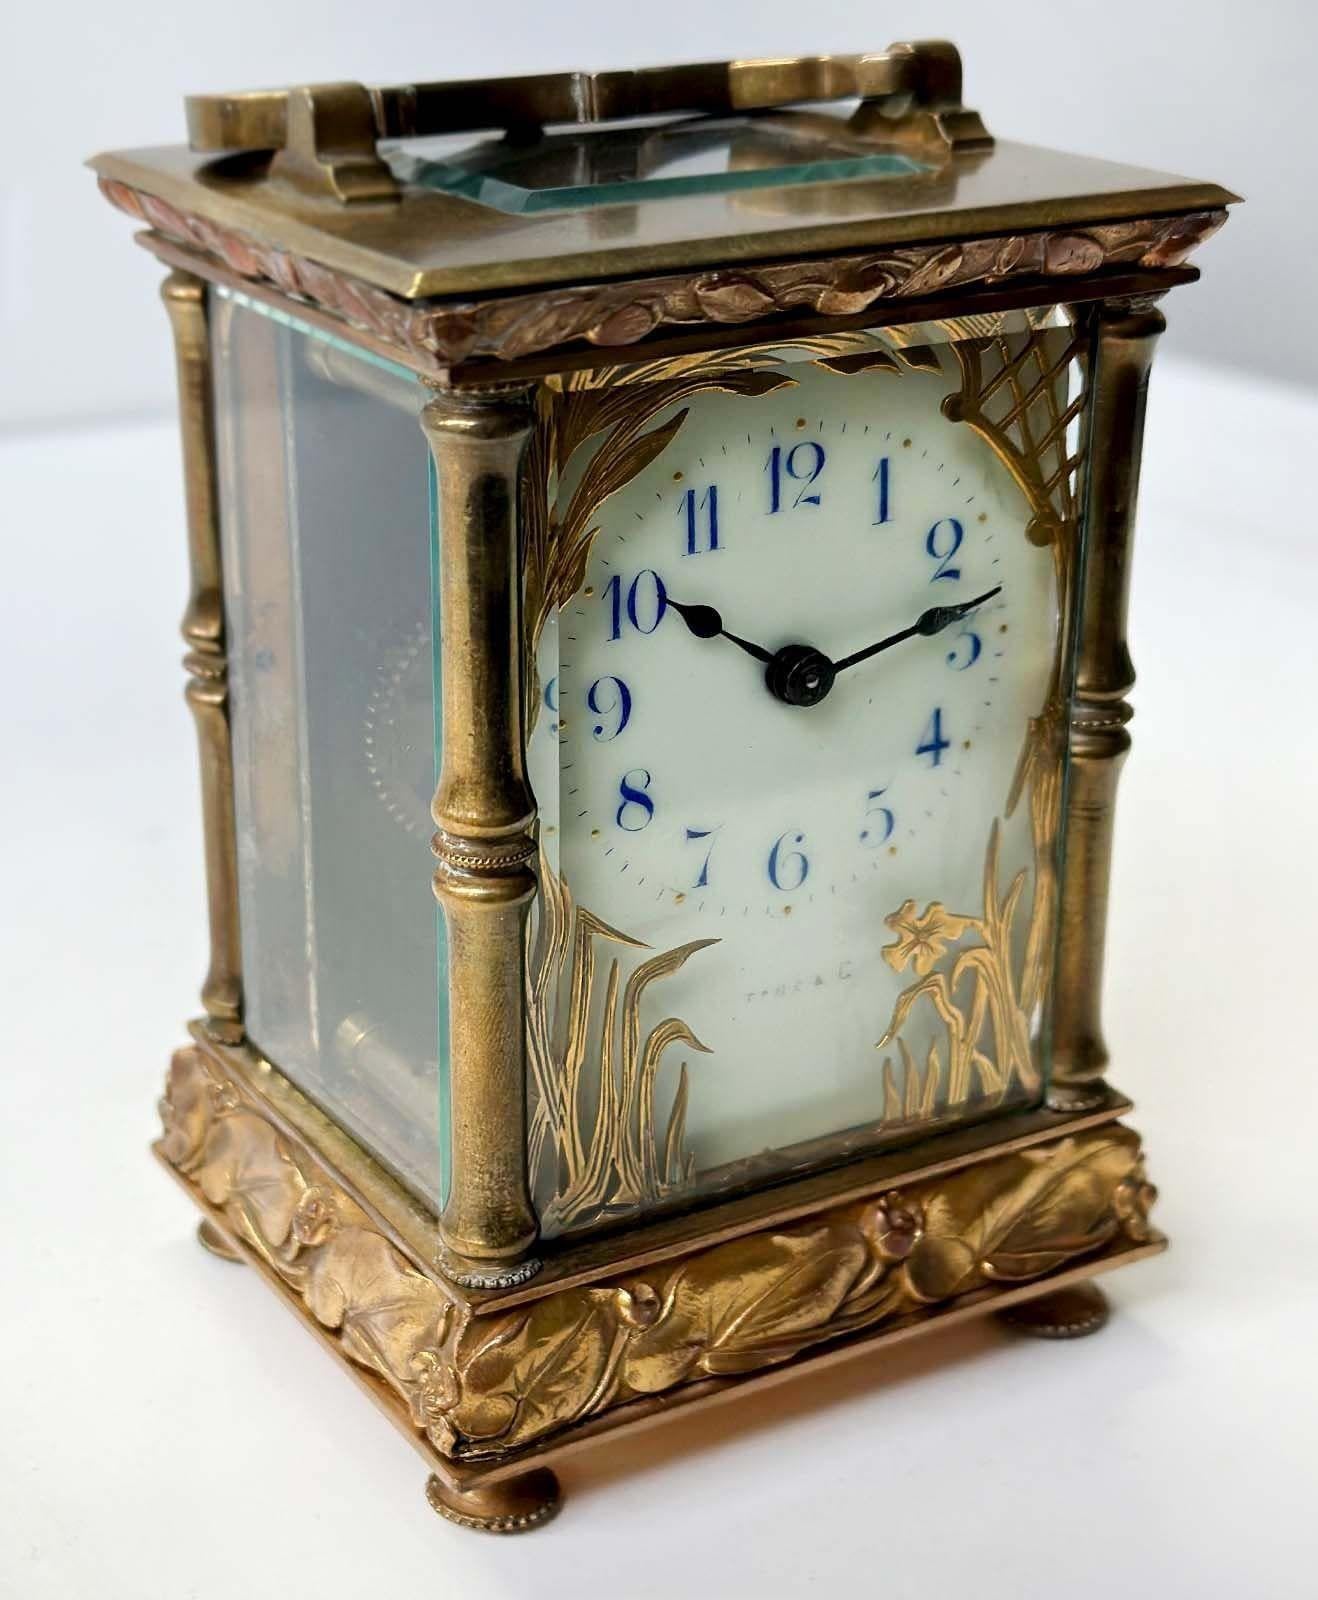 Lovely brass and glass carriage clock by C.R. Crookshank for Tiffany & Co. Made in France in the 20th century. Adorned with endearing botanical and floral motifs all around the piece.
Delicately marked Tiffany & Co. (though slightly faded) and